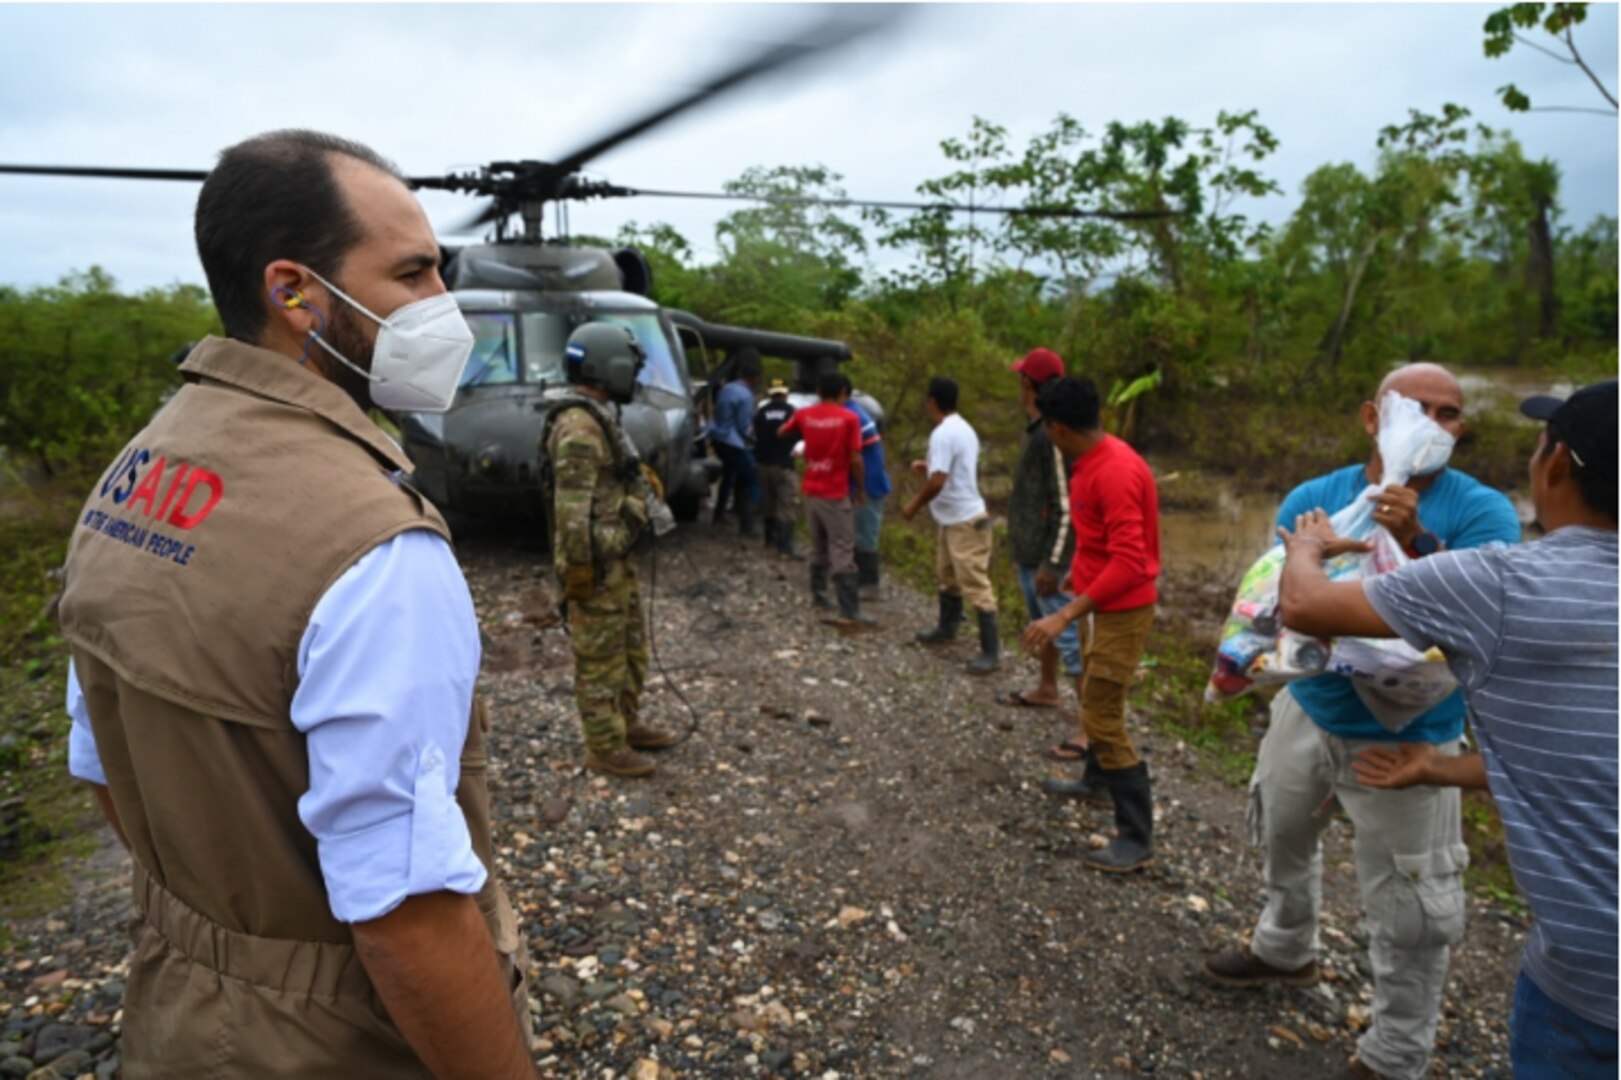 JTF-Bravo concludes disaster relief efforts